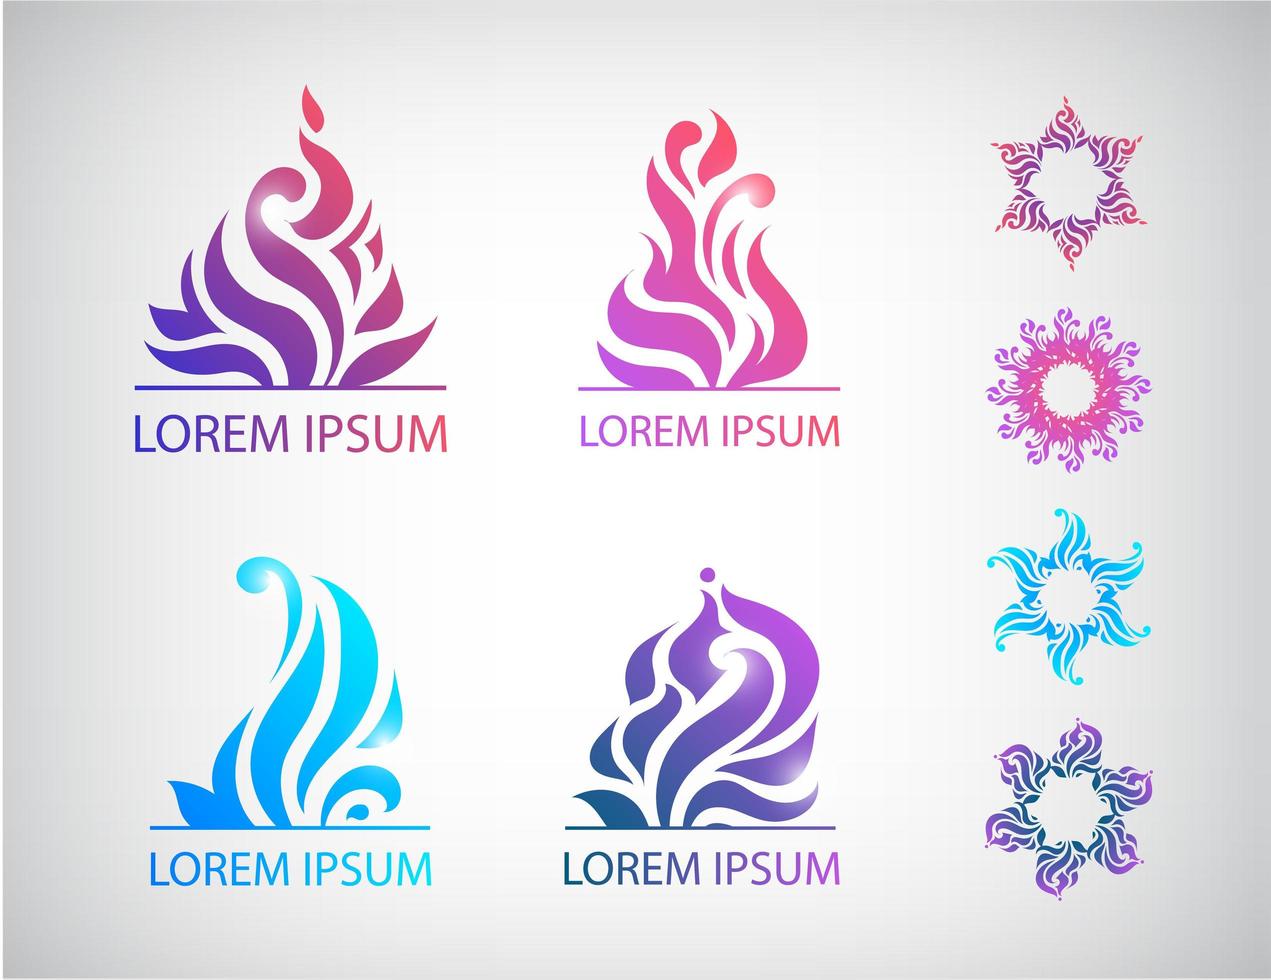 vector set of hand drawn abstract floral icons, spa icons